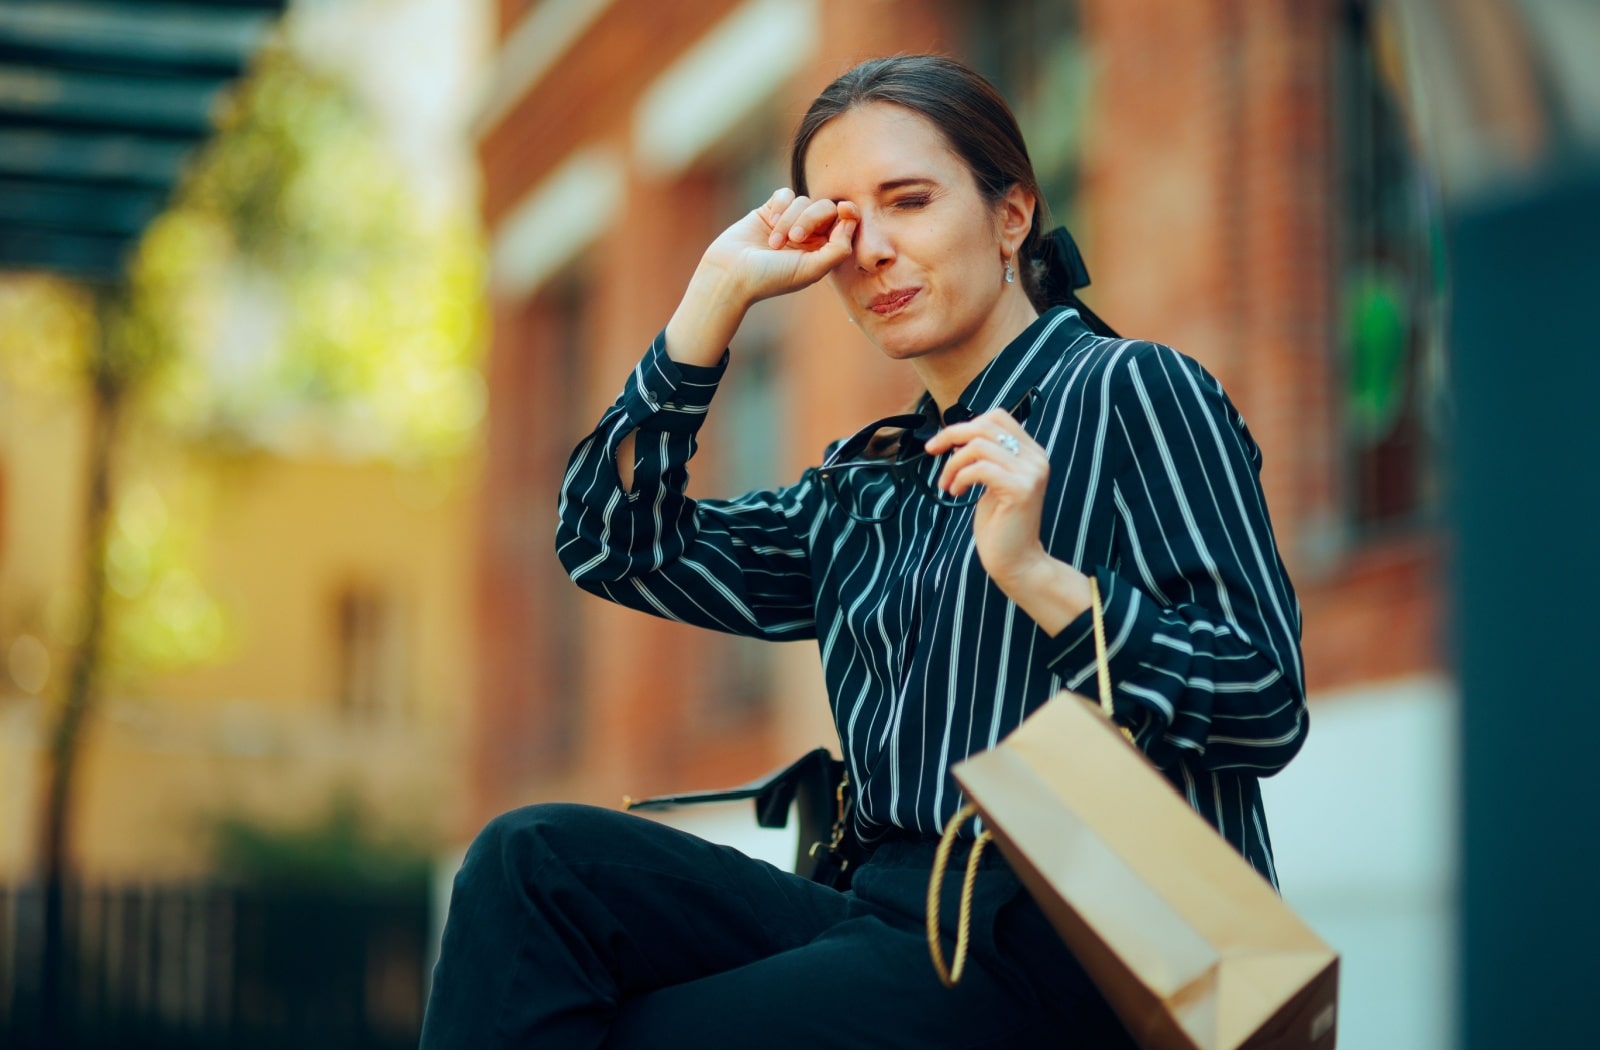 A woman sitting on a bench and rubbing her itchy eye with her right hand